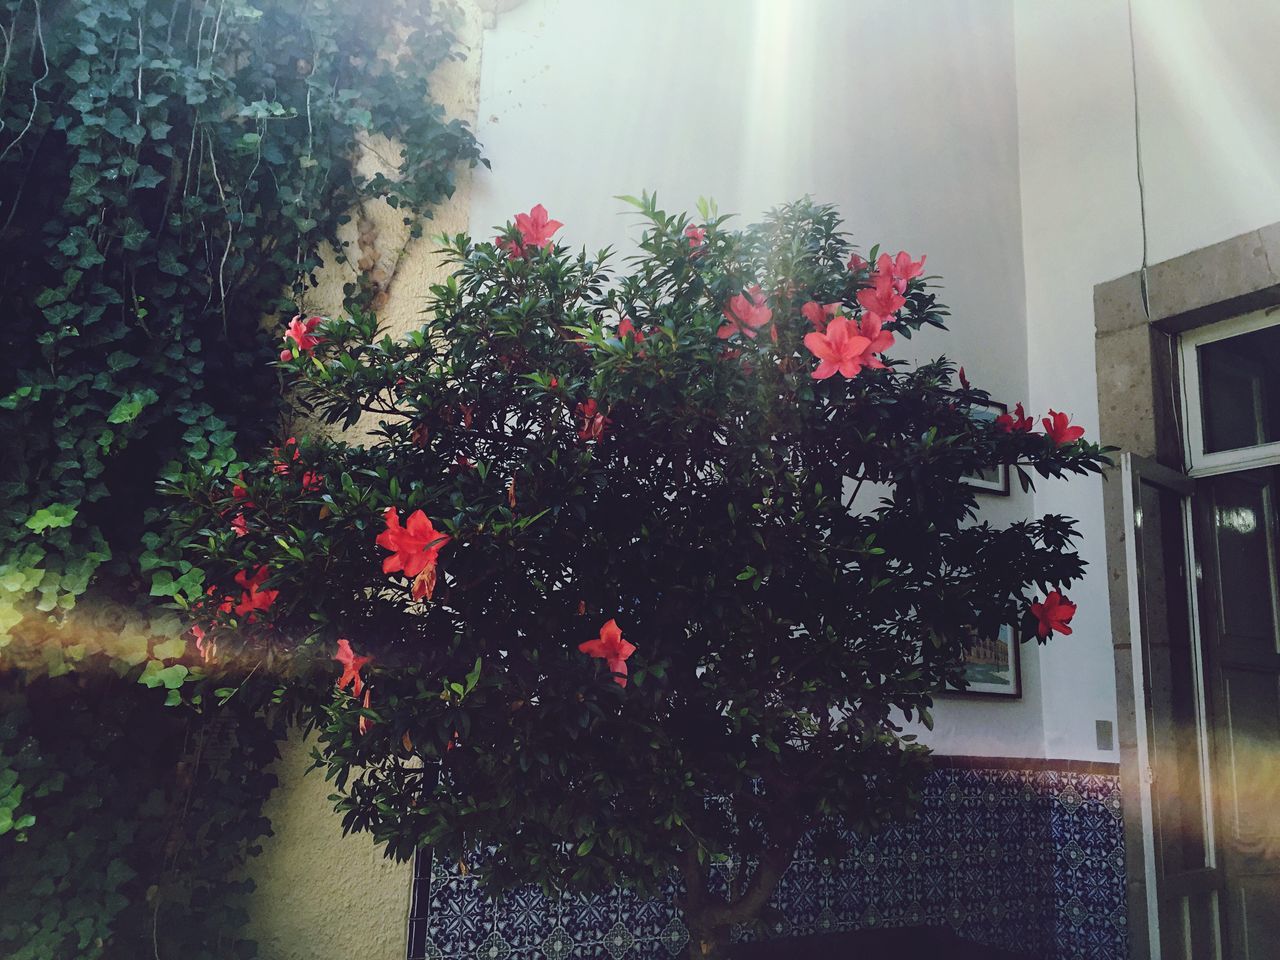 flower, growth, plant, built structure, architecture, window, building exterior, freshness, red, house, potted plant, fragility, nature, beauty in nature, tree, leaf, indoors, no people, sunlight, day